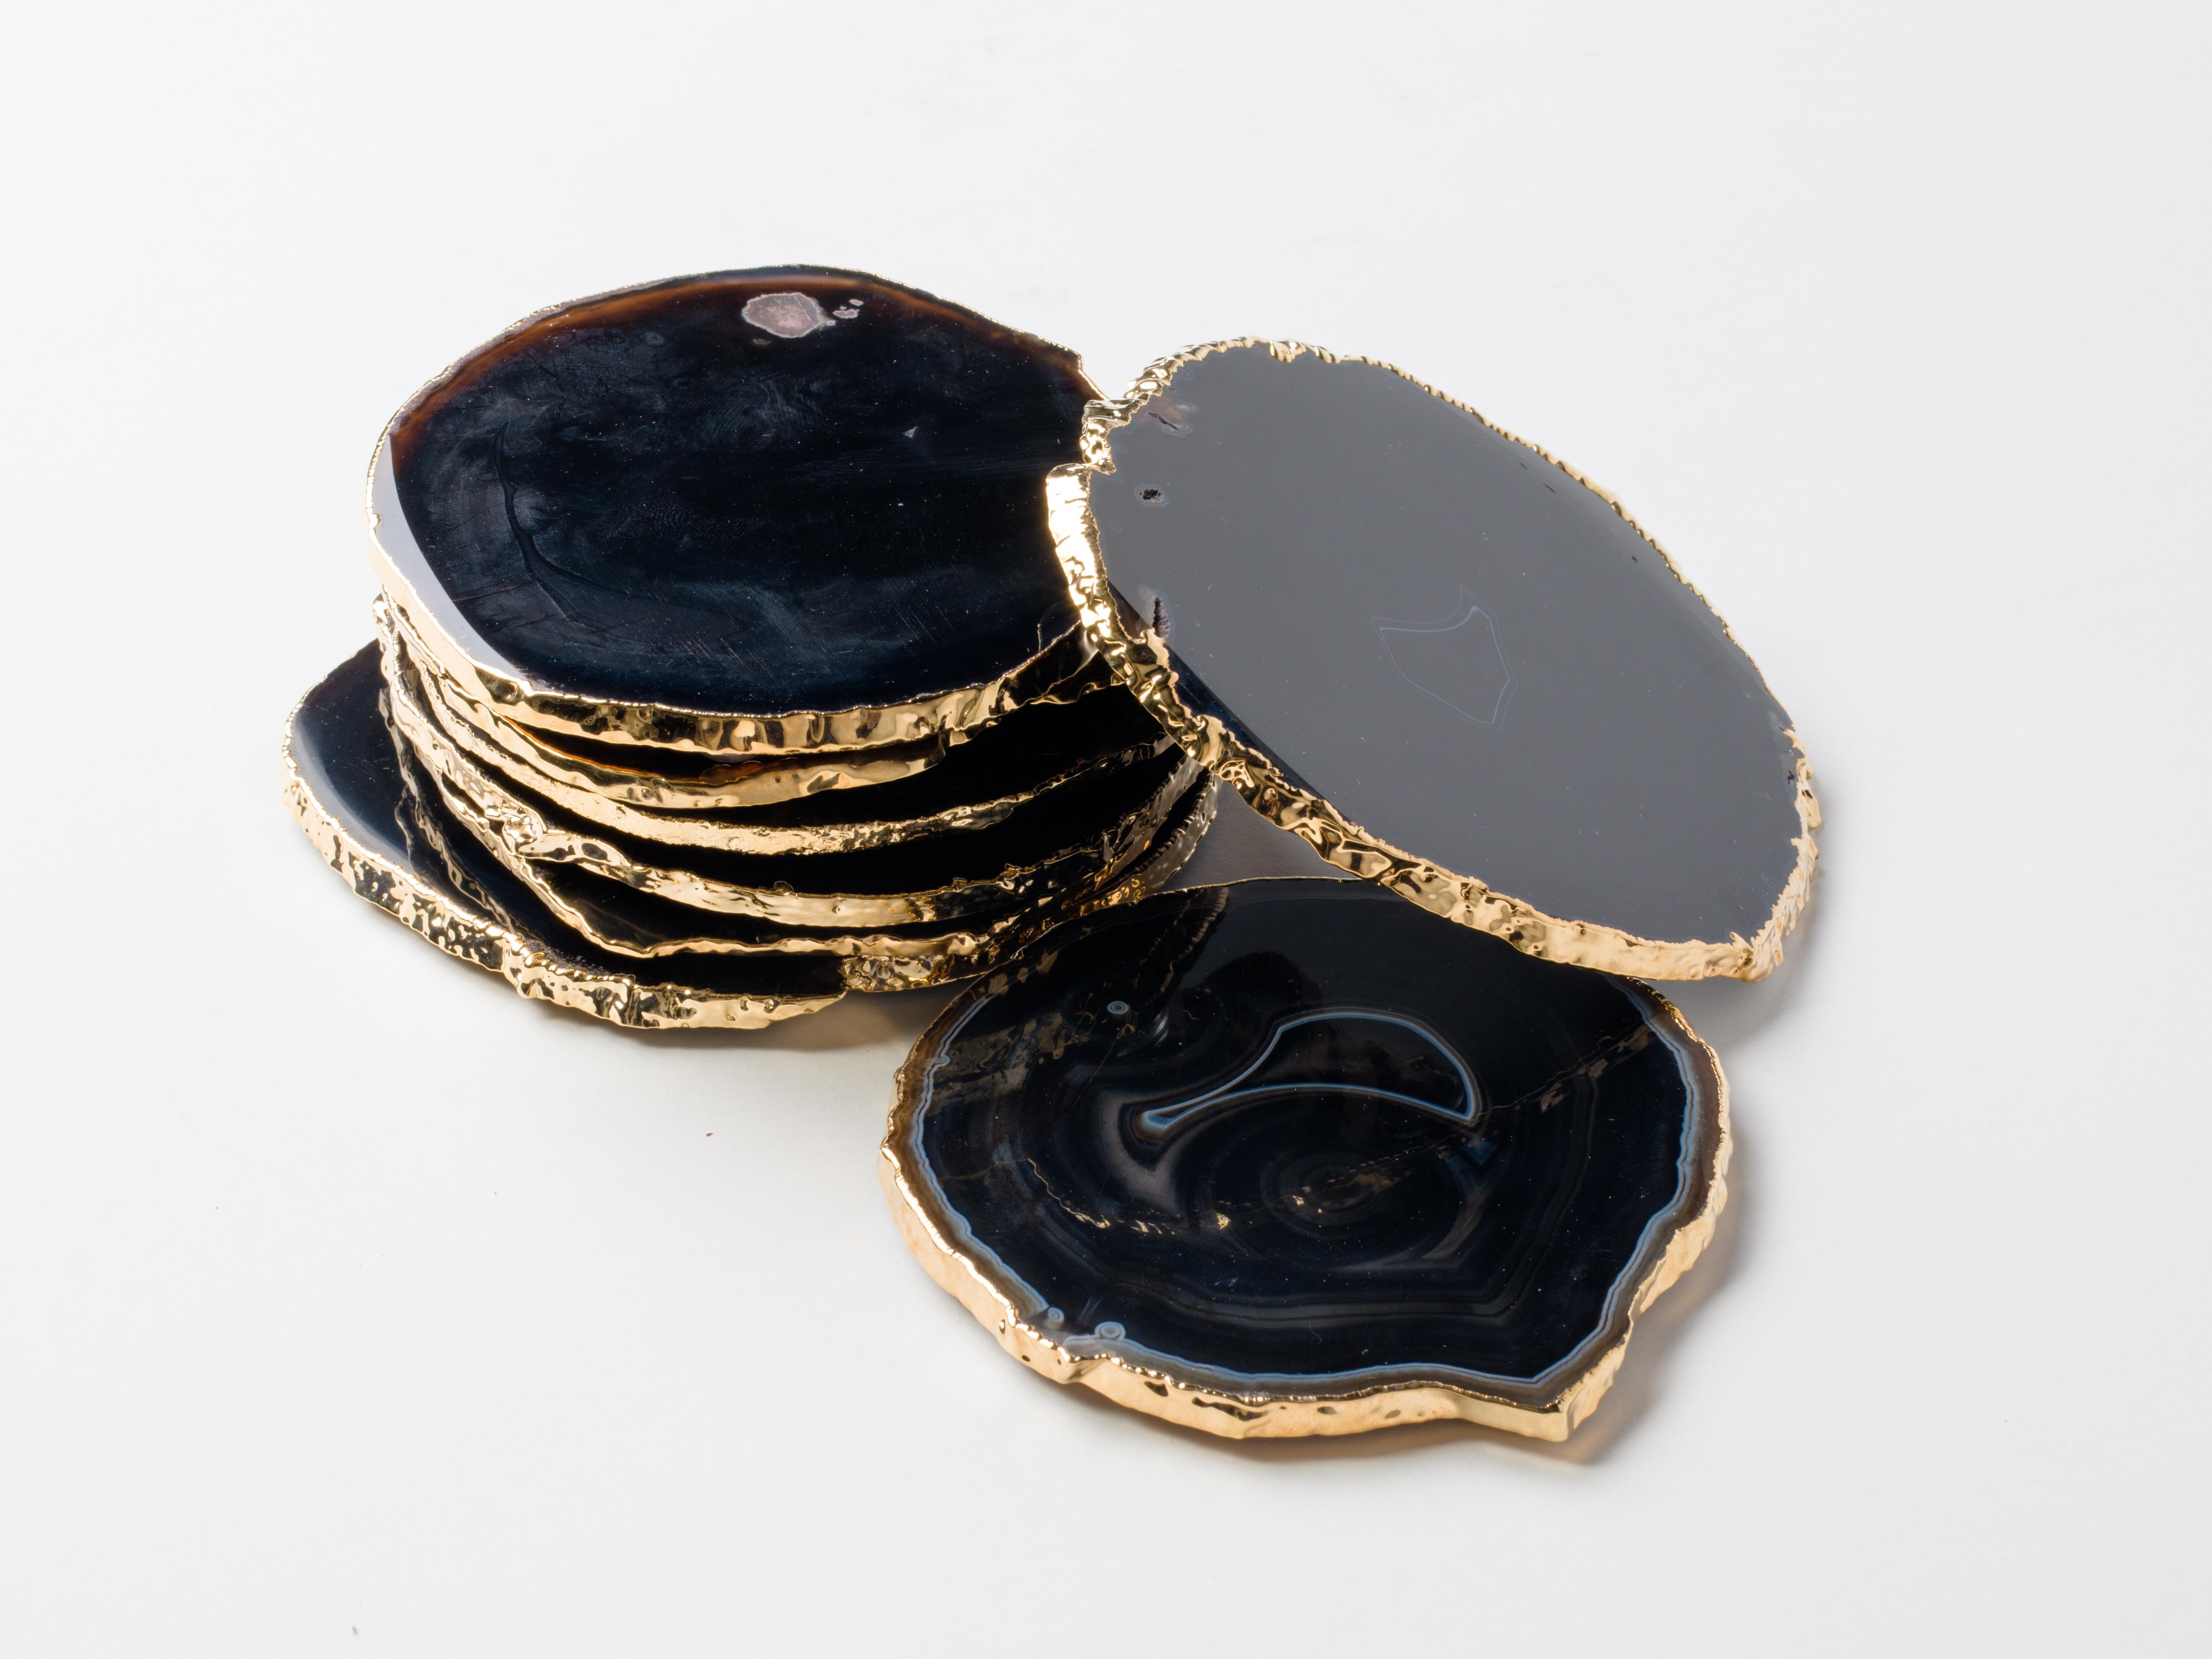 Stunning natural agate and crystal coasters with 24-karat gold plated edges. Polished fronts and natural rough edges. No two pieces are alike. Make beautiful accessories to any coffee table or dining table setting. Three color variations are